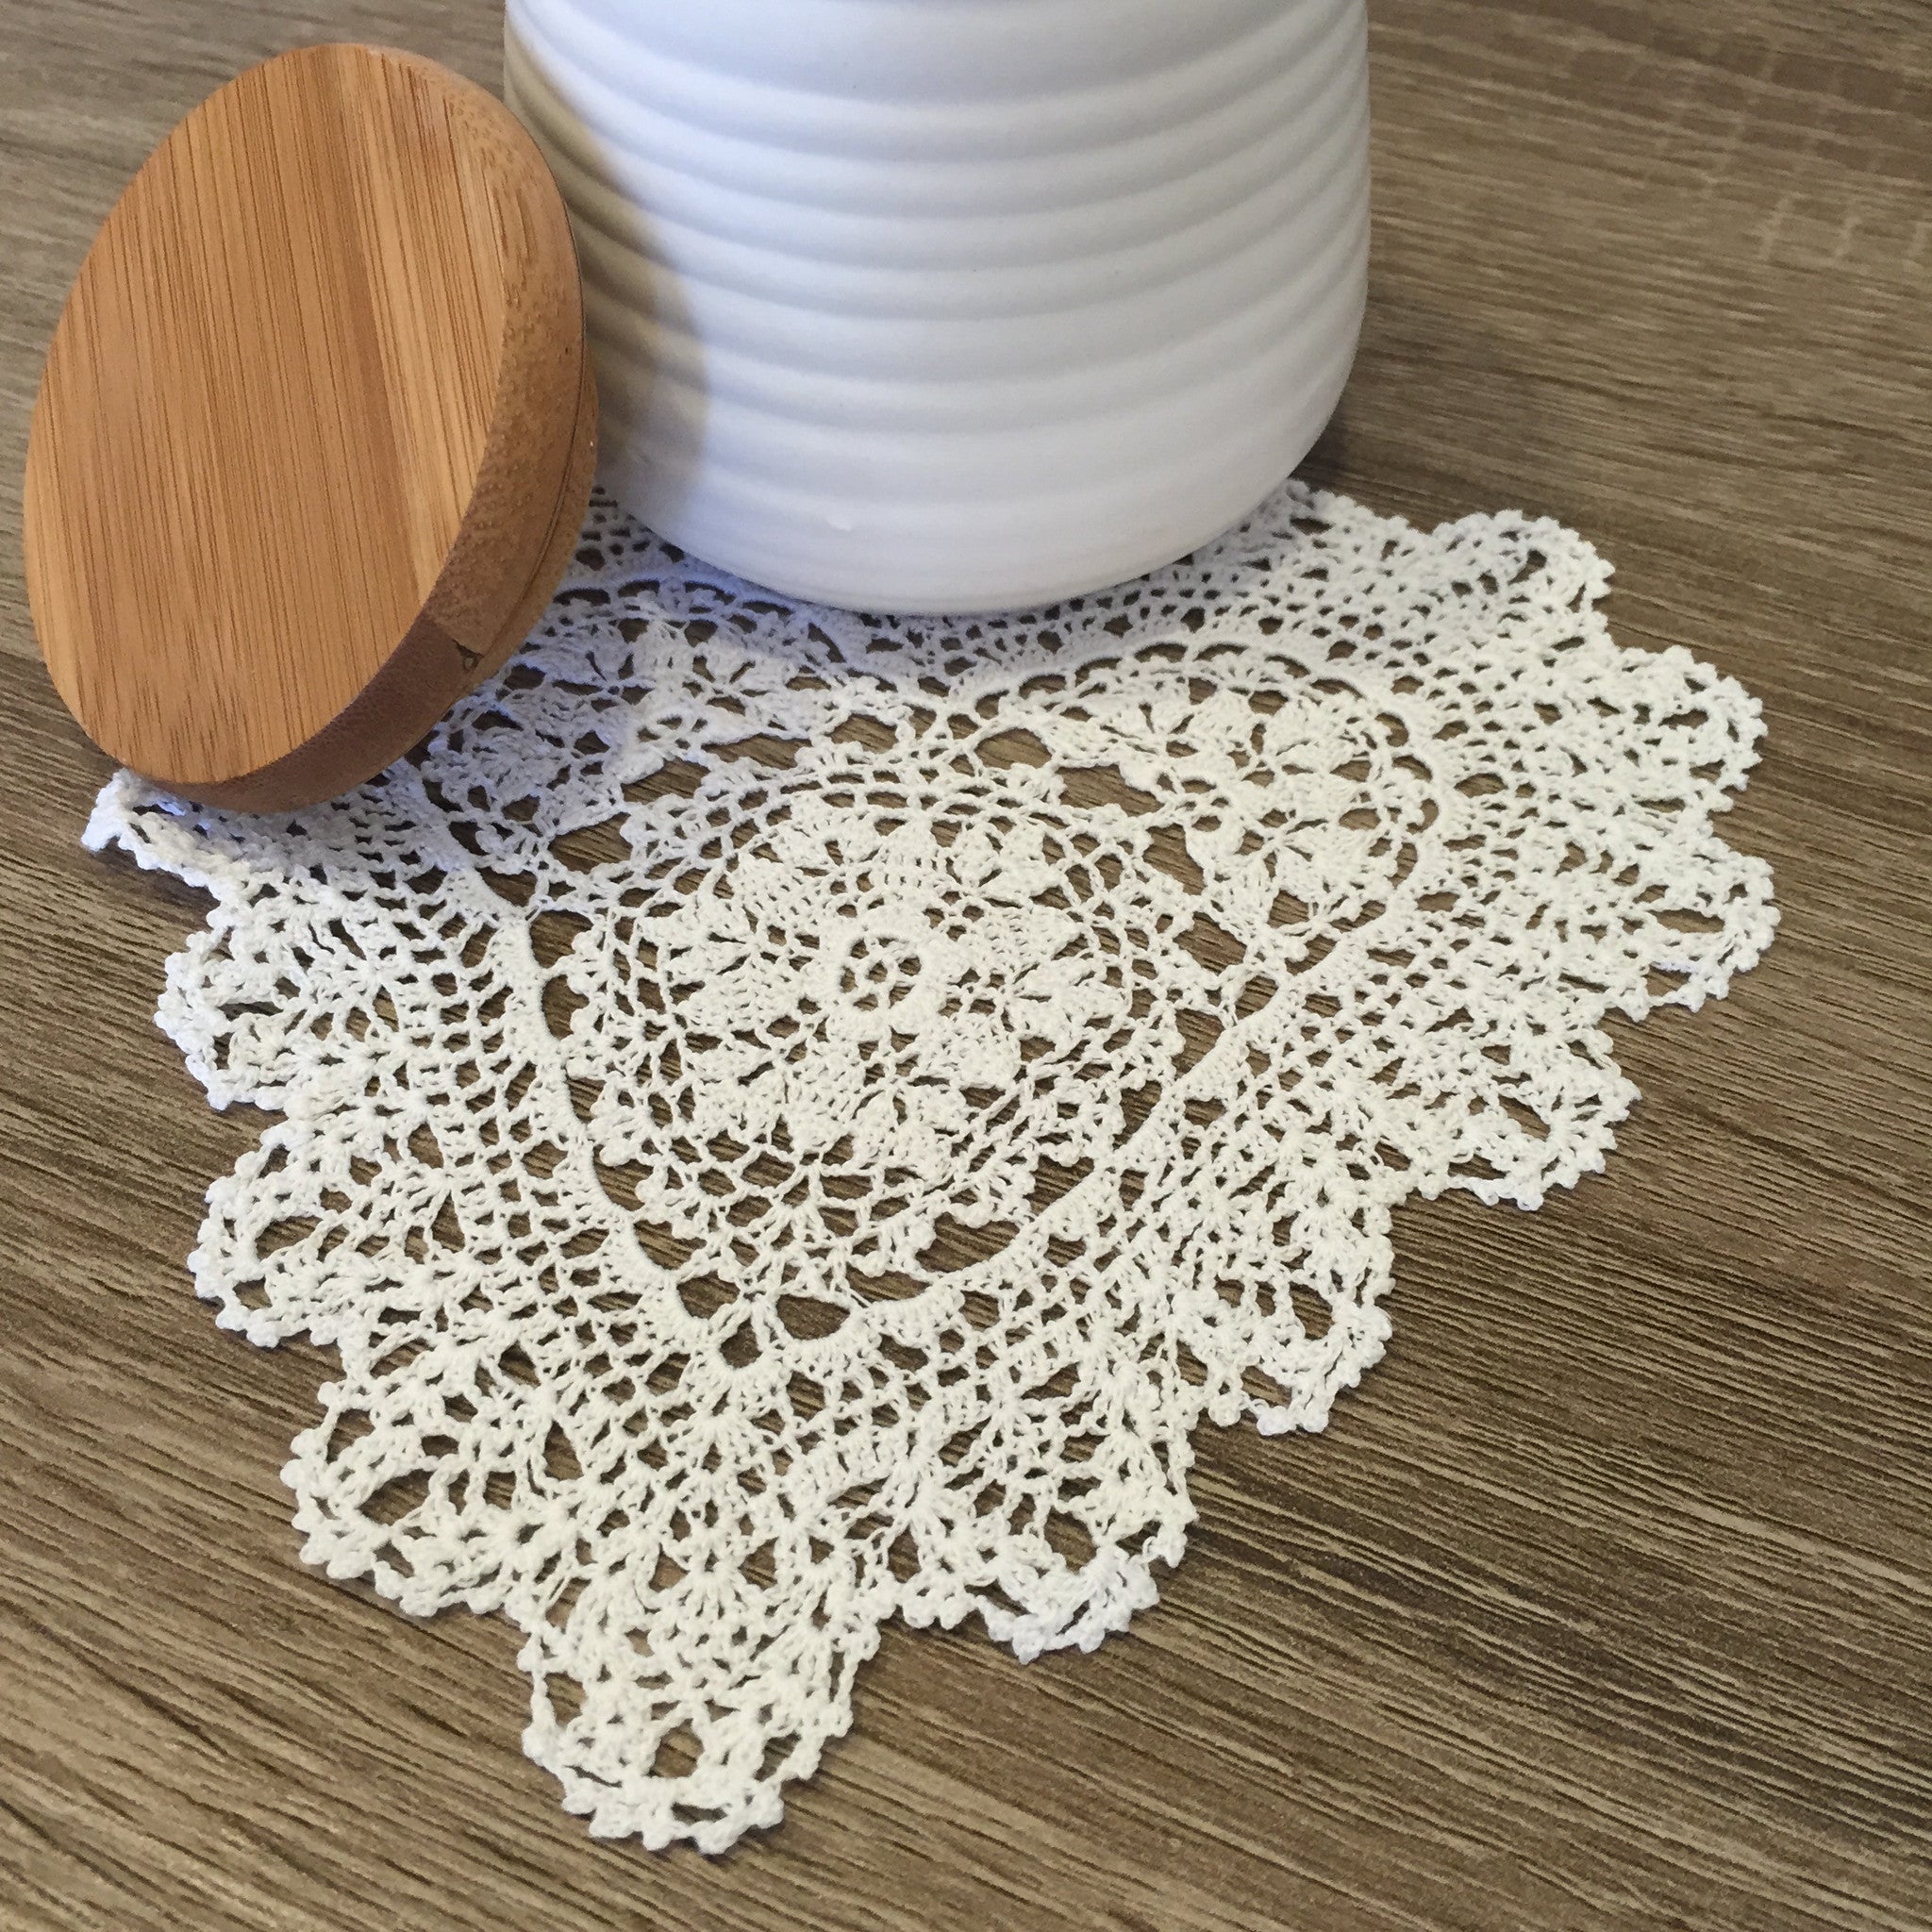 Strawberry Heart Shaped Doilies White 6" Inch Set of 12